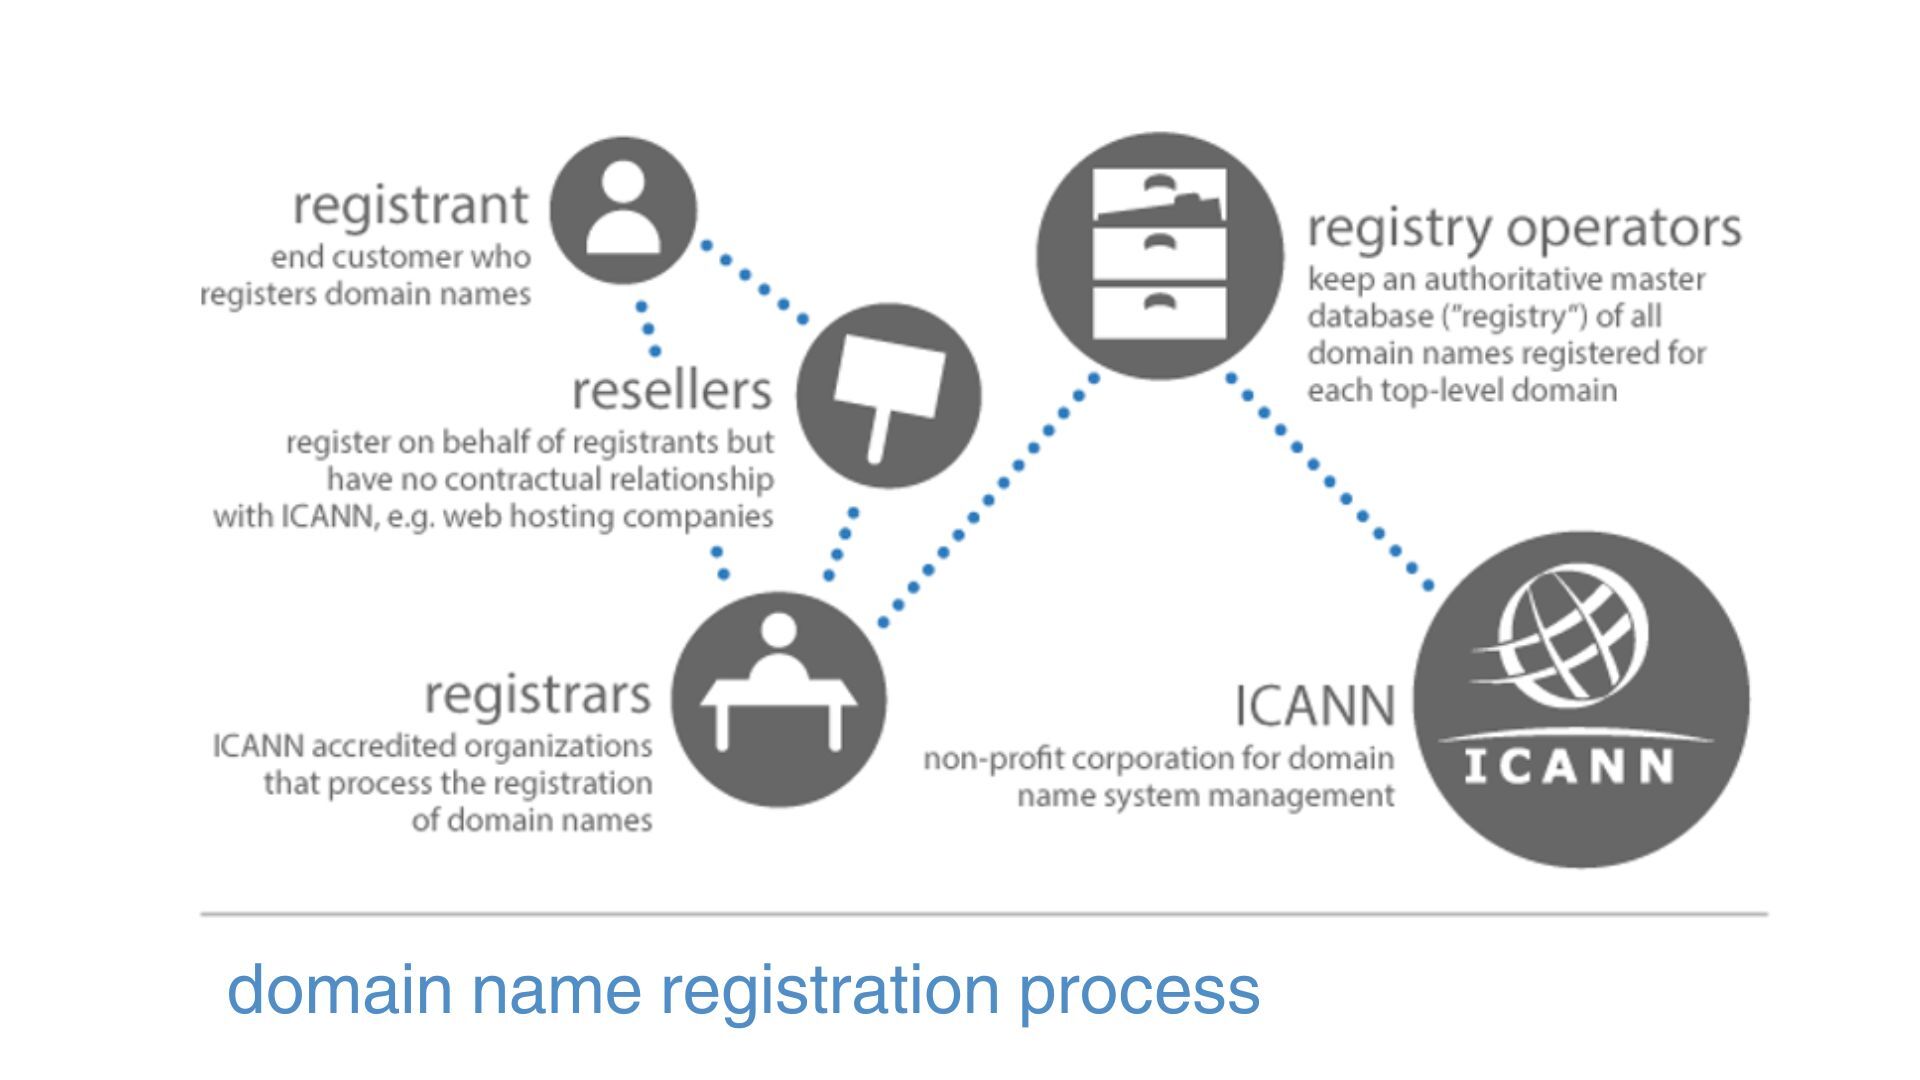 The domain name registration process is described as follows: Registrant who is an end customer who registers domain names. Resellers who register on behalf of registrants but have no contractual relationship with ICANN, e.g. web hosting companies. Registrars who are ICANN accredited organizations that process the registration of domain names. Registry operators who keep an authoritative master database ("registry") of all domain names registered for each top-level domain. ICANN a non-profit corporation for domain name system management.